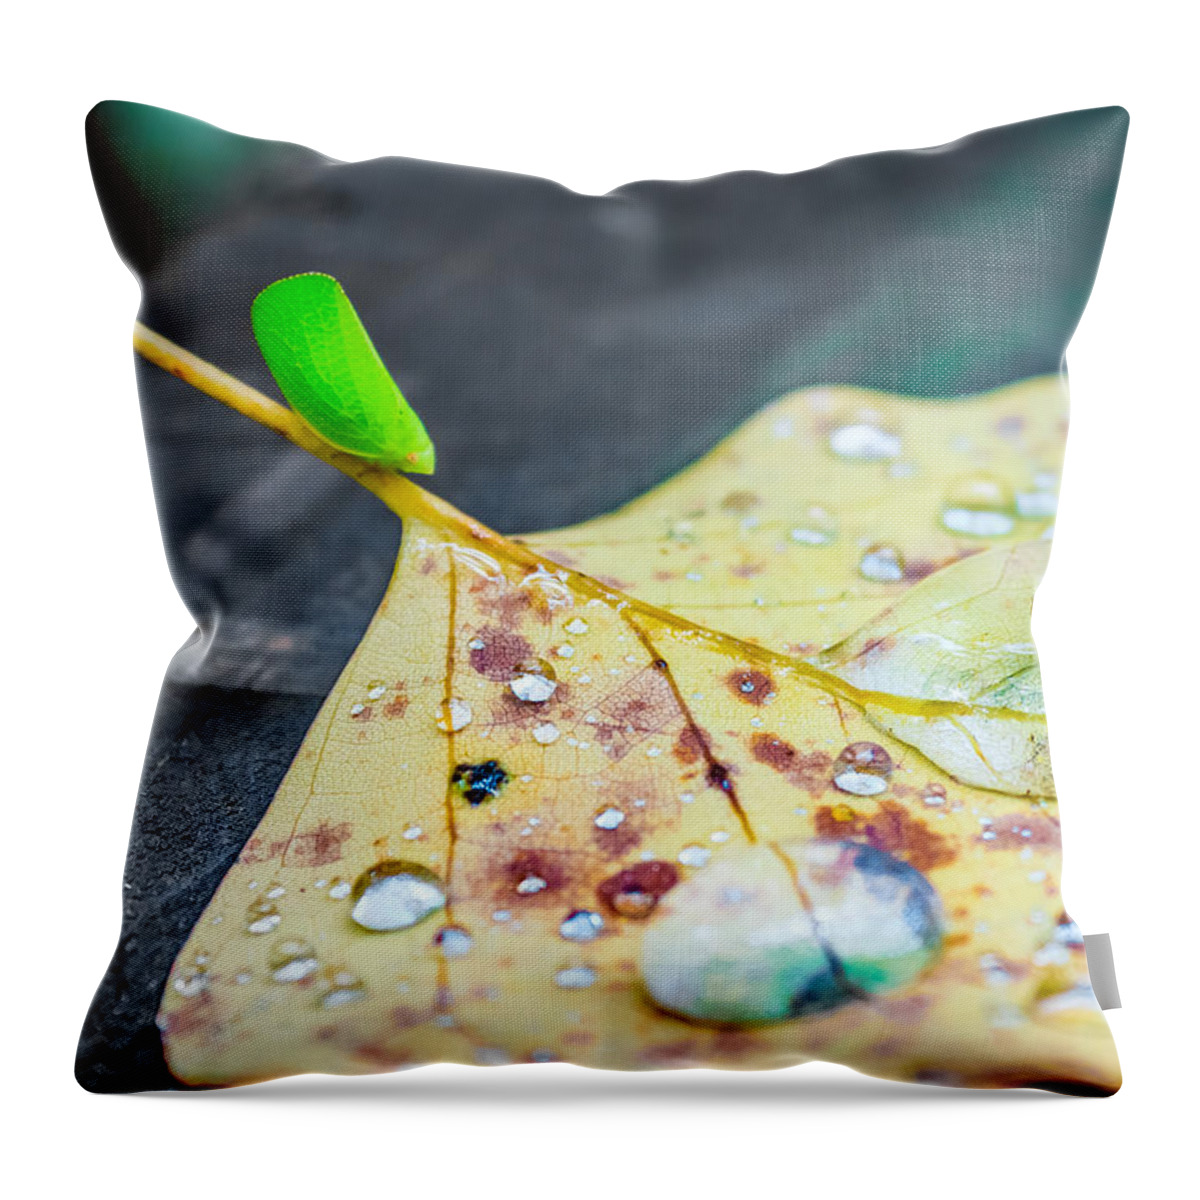 Green Throw Pillow featuring the photograph Fulgoroidea On A Leaf by Traveler's Pics